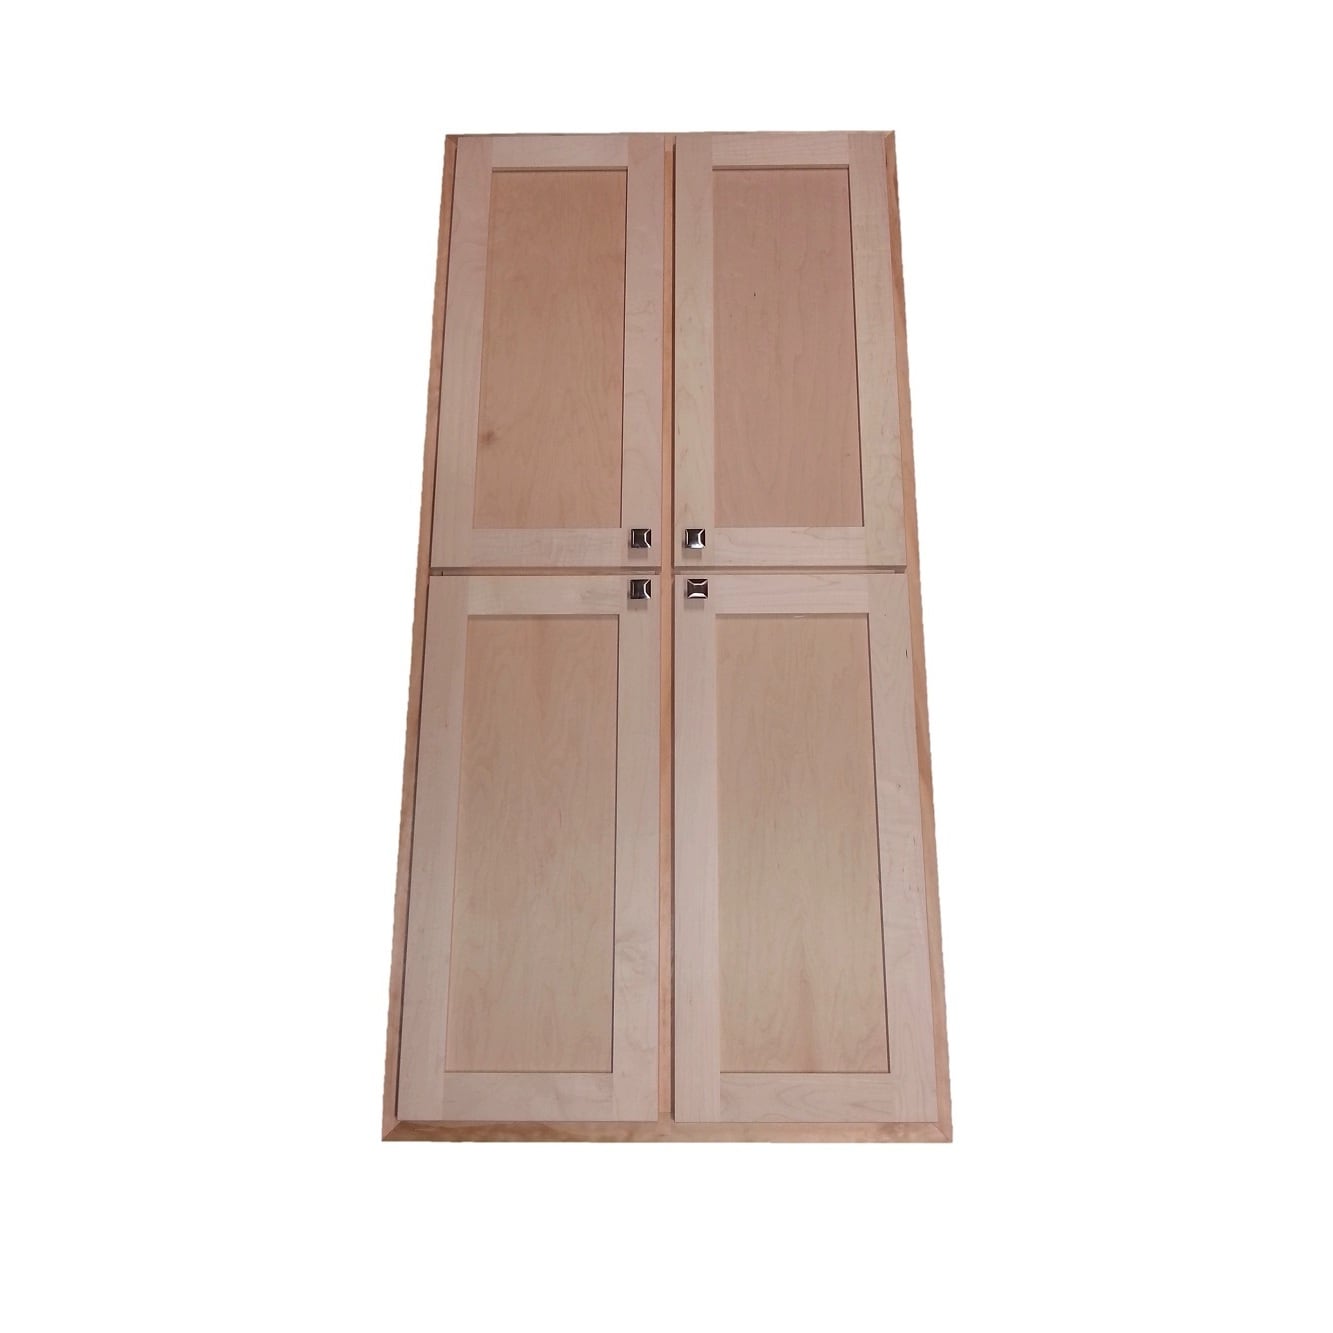 Shop Wg Wood Products Wood 24 Inch Wide X 3 5 Inch Deep Recessed